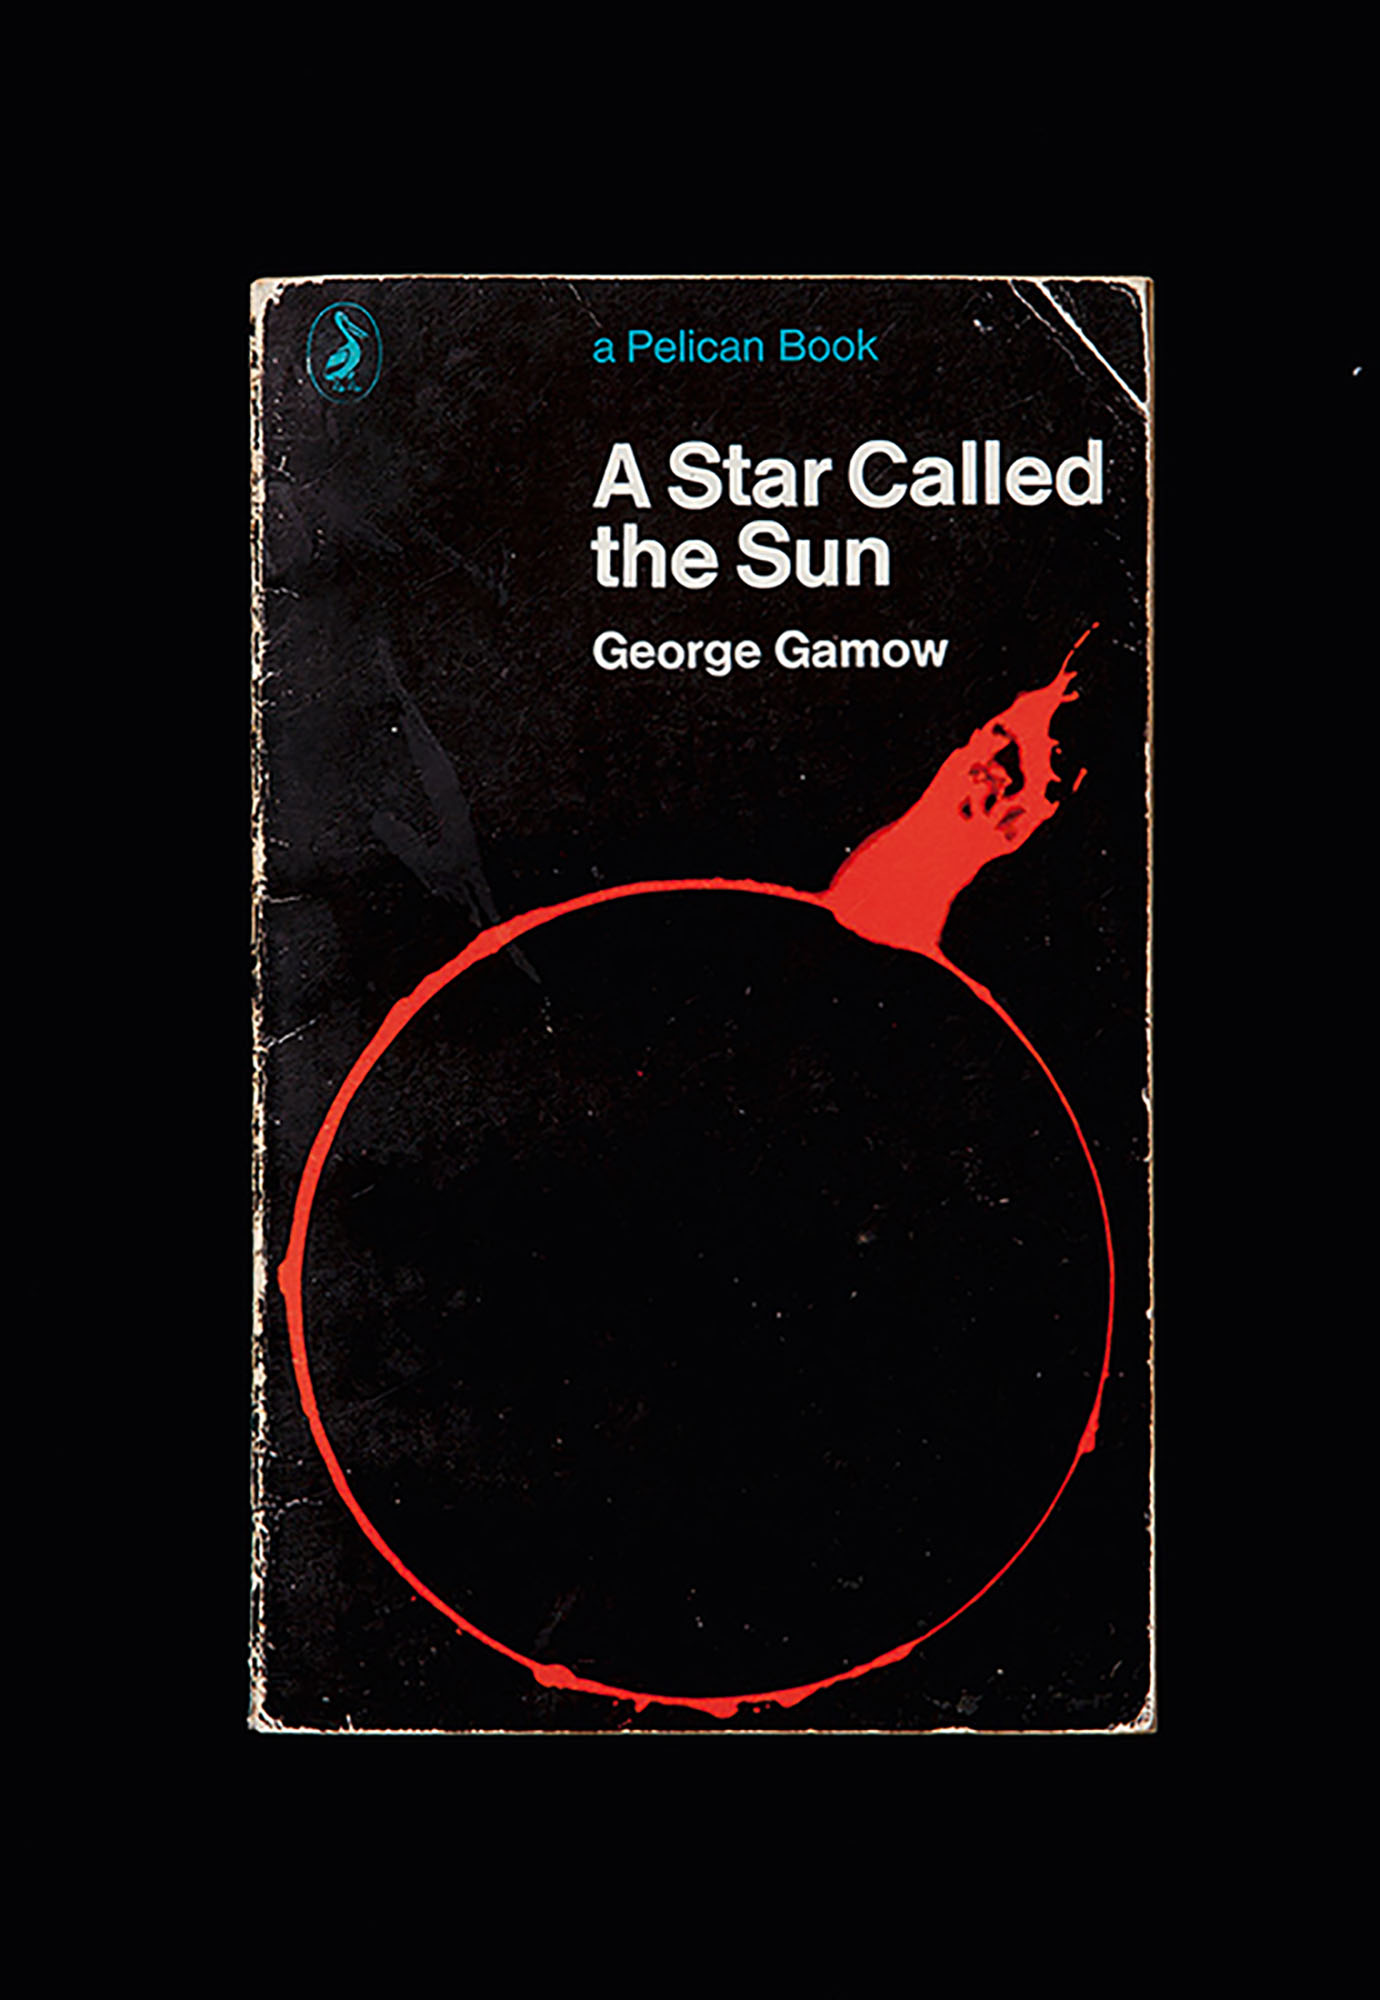 Front cover of George Gamow, *A Star Called the Sun* (Australia: A Pelican Book, Penguin, 1964). Reproduction photographer: Andrew Curtis.